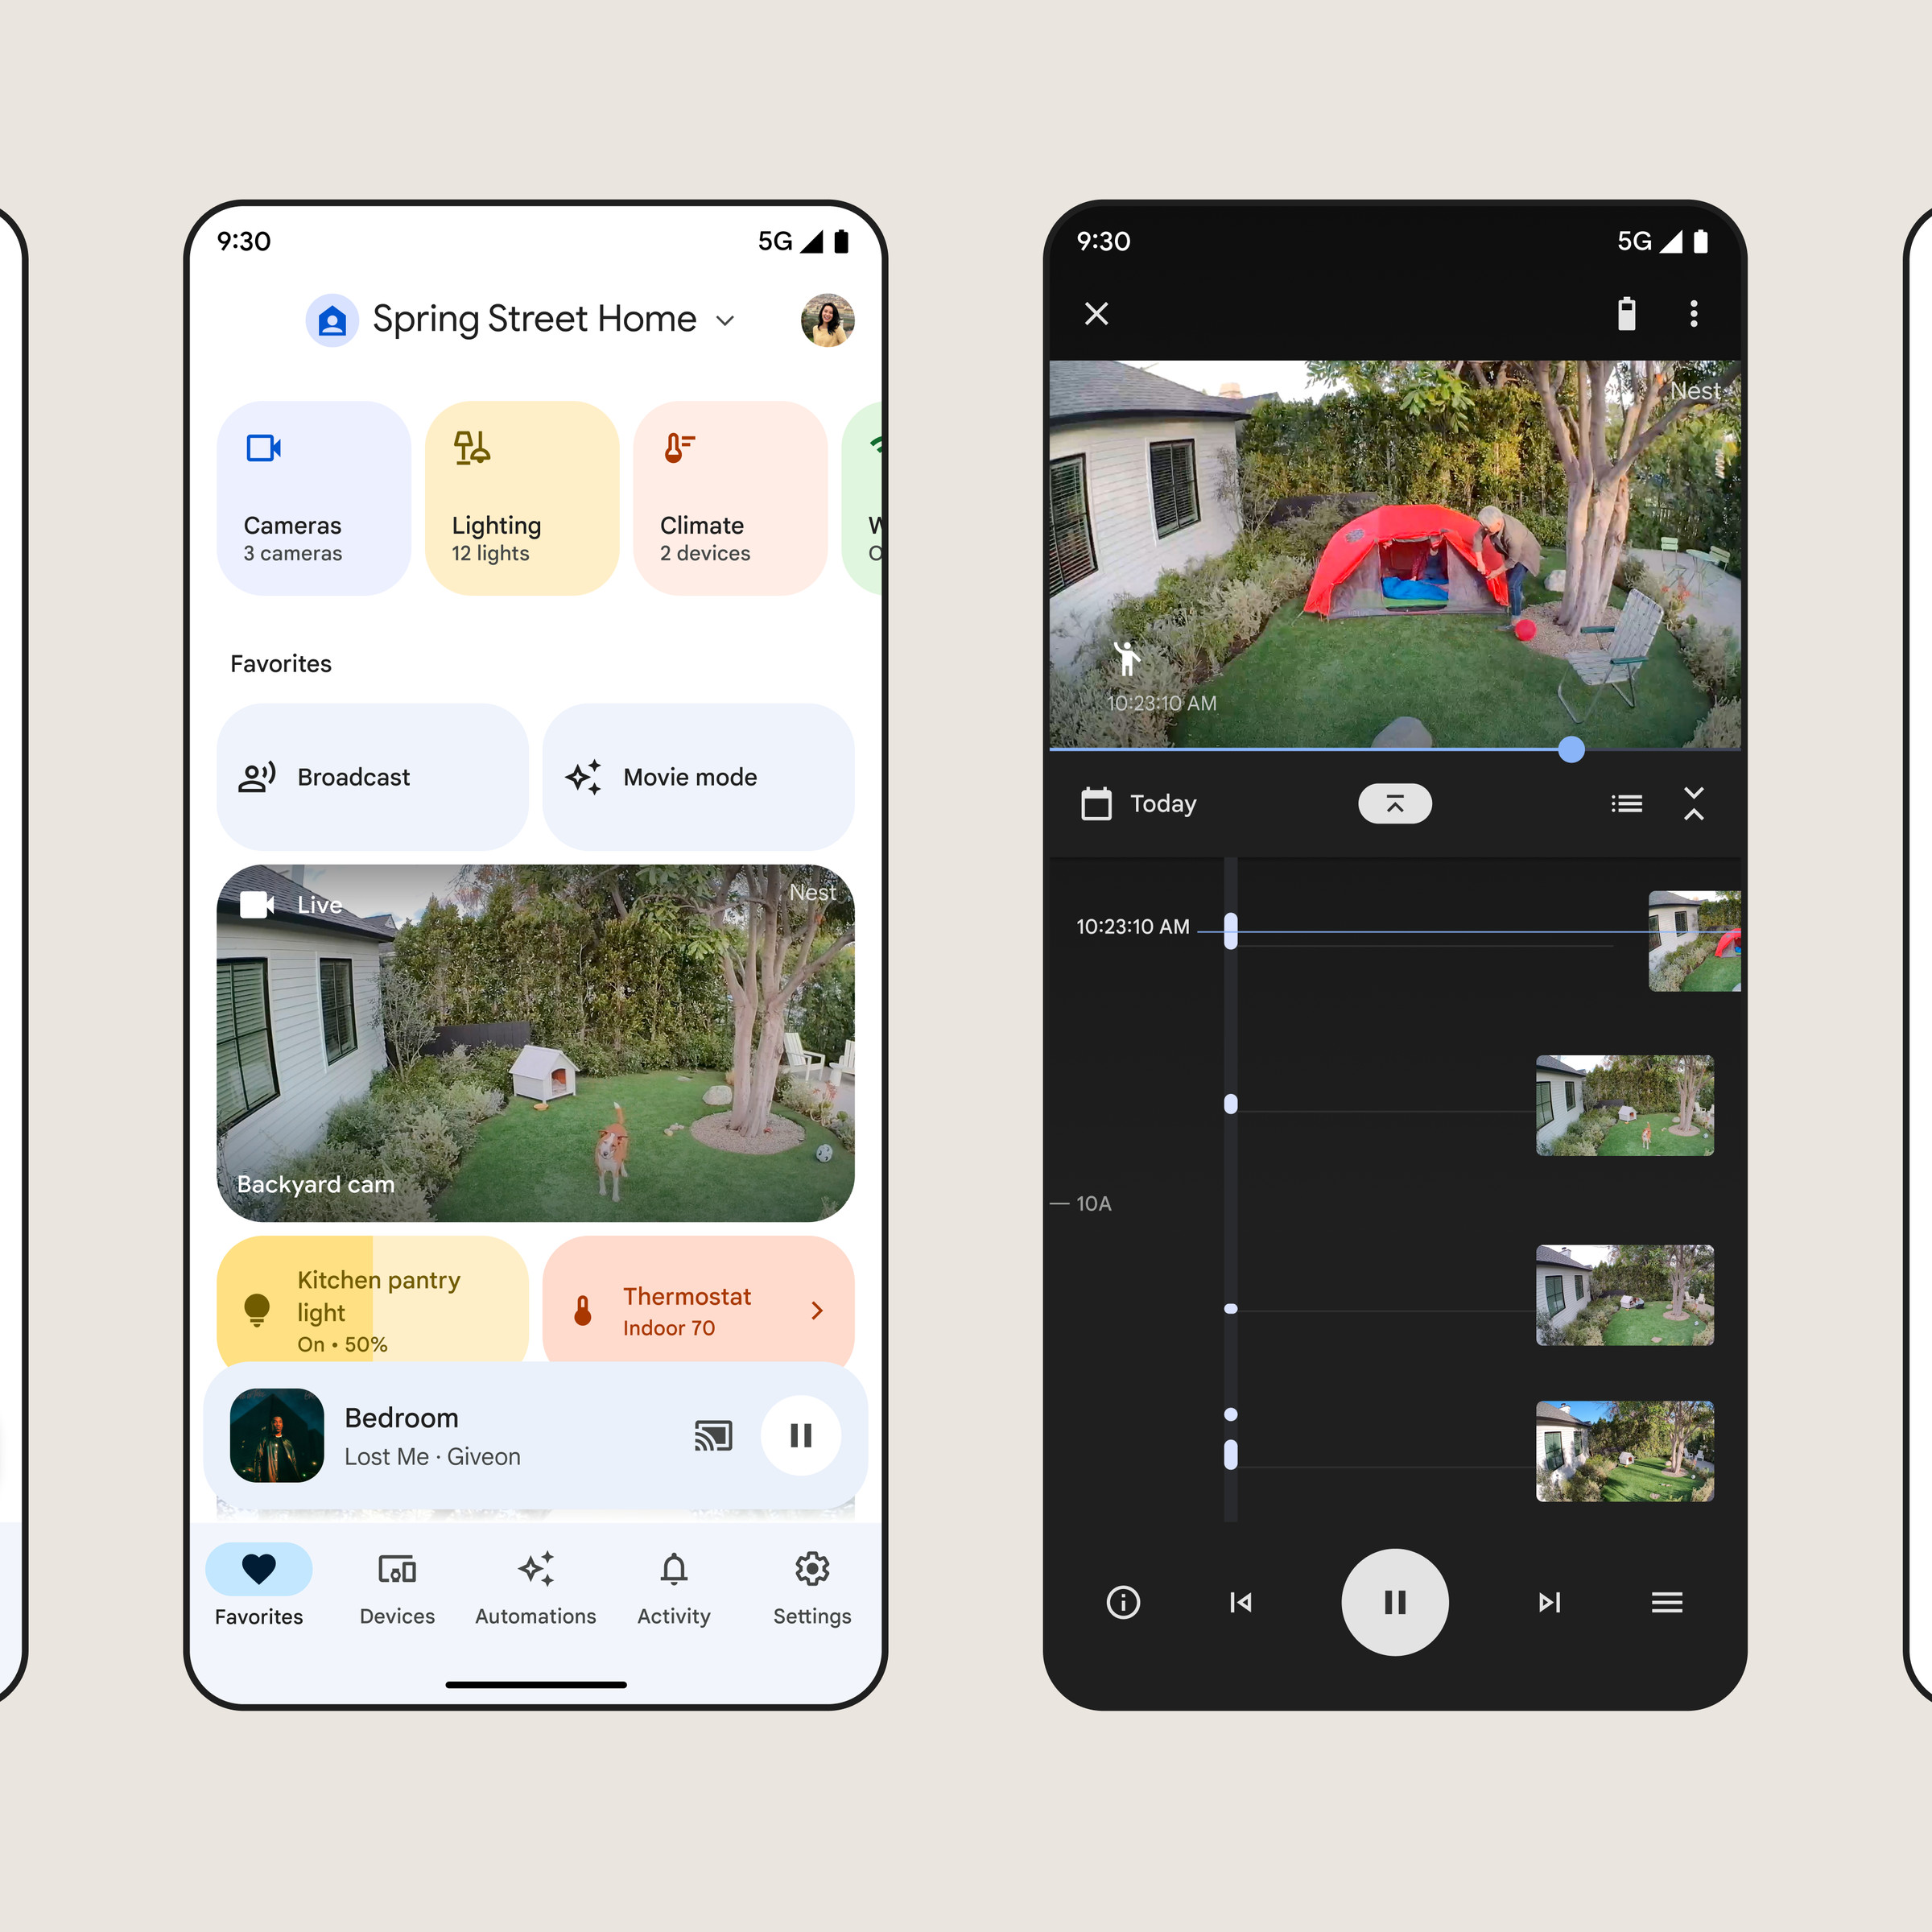 Google has redesigned its smart home app.